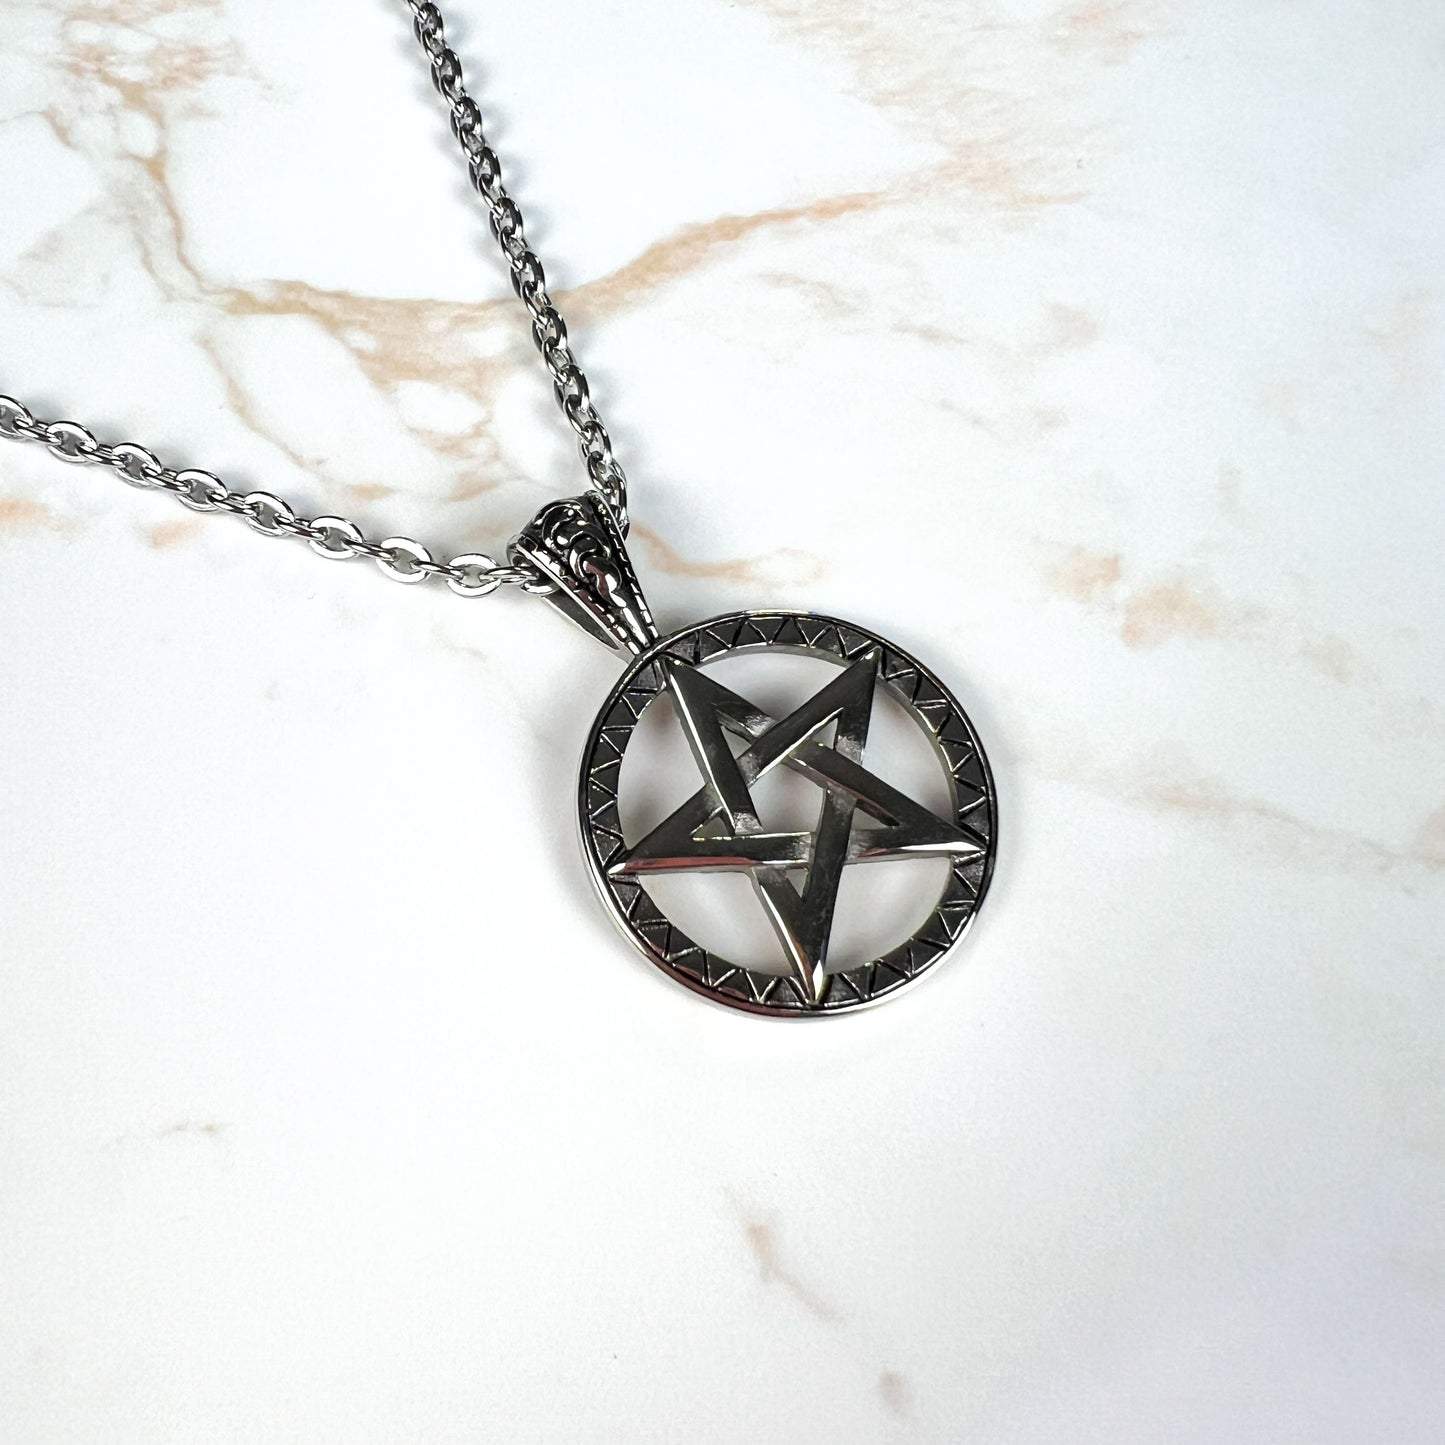 Stainless steel pentacle witch necklace